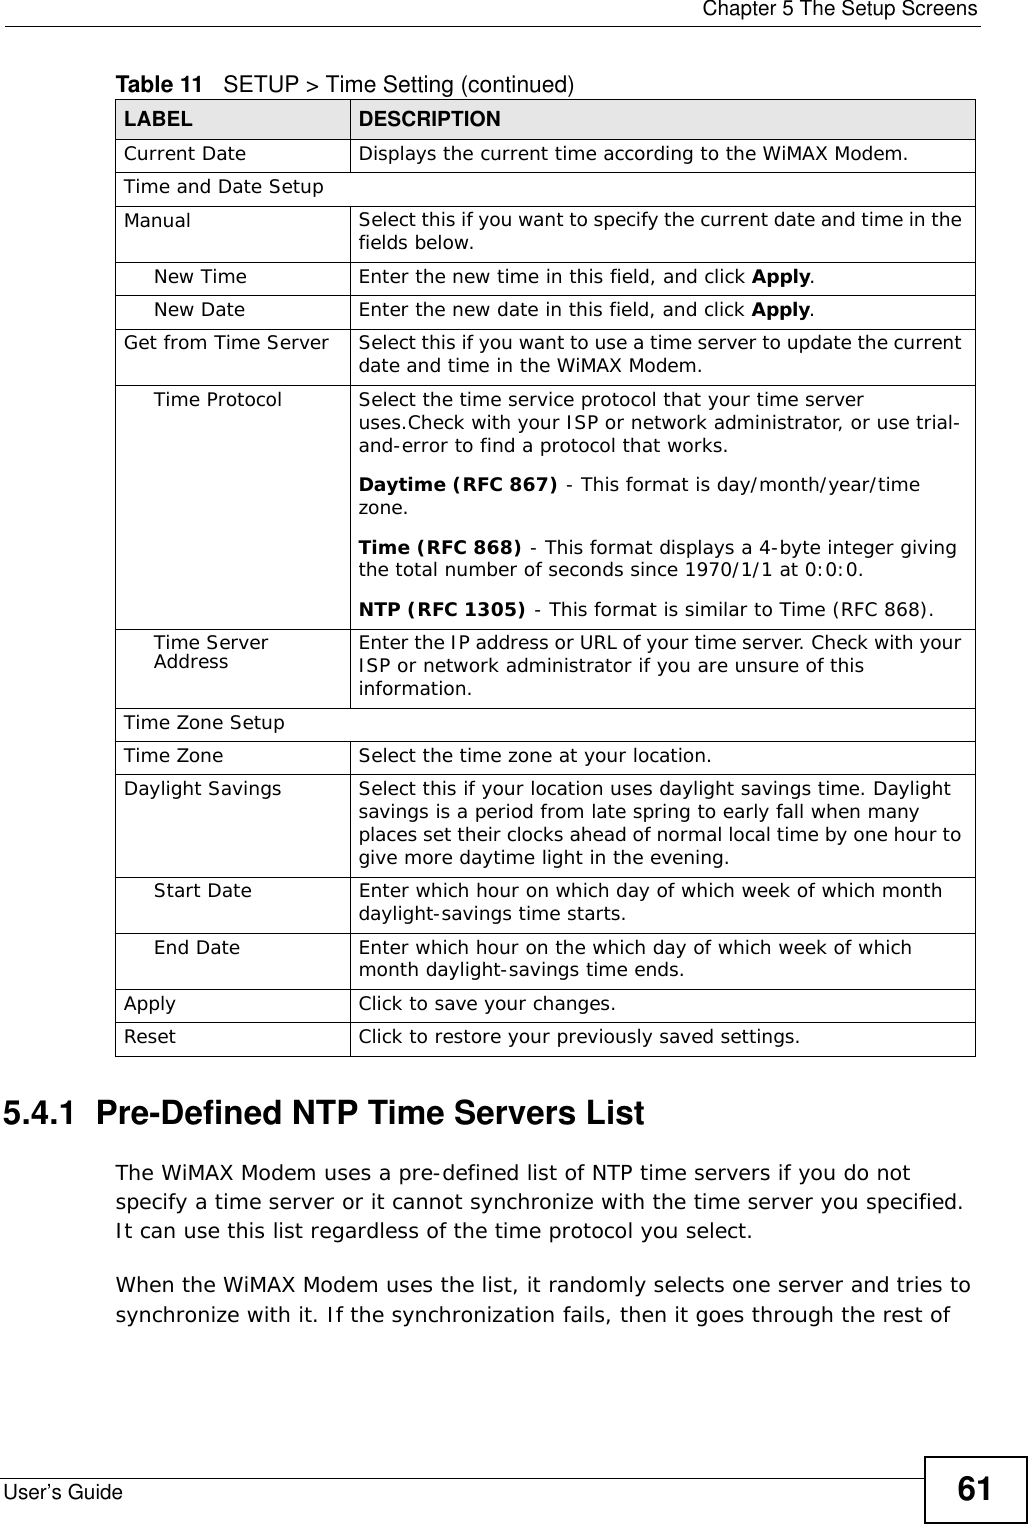  Chapter 5 The Setup ScreensUser’s Guide 615.4.1  Pre-Defined NTP Time Servers ListThe WiMAX Modem uses a pre-defined list of NTP time servers if you do not specify a time server or it cannot synchronize with the time server you specified. It can use this list regardless of the time protocol you select.When the WiMAX Modem uses the list, it randomly selects one server and tries to synchronize with it. If the synchronization fails, then it goes through the rest of Current Date Displays the current time according to the WiMAX Modem.Time and Date SetupManual Select this if you want to specify the current date and time in the fields below.New Time Enter the new time in this field, and click Apply.New Date Enter the new date in this field, and click Apply.Get from Time Server Select this if you want to use a time server to update the current date and time in the WiMAX Modem.Time Protocol Select the time service protocol that your time server uses.Check with your ISP or network administrator, or use trial-and-error to find a protocol that works.Daytime (RFC 867) - This format is day/month/year/time zone.Time (RFC 868) - This format displays a 4-byte integer giving the total number of seconds since 1970/1/1 at 0:0:0.NTP (RFC 1305) - This format is similar to Time (RFC 868).Time Server Address Enter the IP address or URL of your time server. Check with your ISP or network administrator if you are unsure of this information.Time Zone SetupTime Zone Select the time zone at your location.Daylight Savings Select this if your location uses daylight savings time. Daylight savings is a period from late spring to early fall when many places set their clocks ahead of normal local time by one hour to give more daytime light in the evening.Start Date Enter which hour on which day of which week of which month daylight-savings time starts.End Date Enter which hour on the which day of which week of which month daylight-savings time ends.Apply Click to save your changes.Reset Click to restore your previously saved settings.Table 11   SETUP &gt; Time Setting (continued)LABEL DESCRIPTION